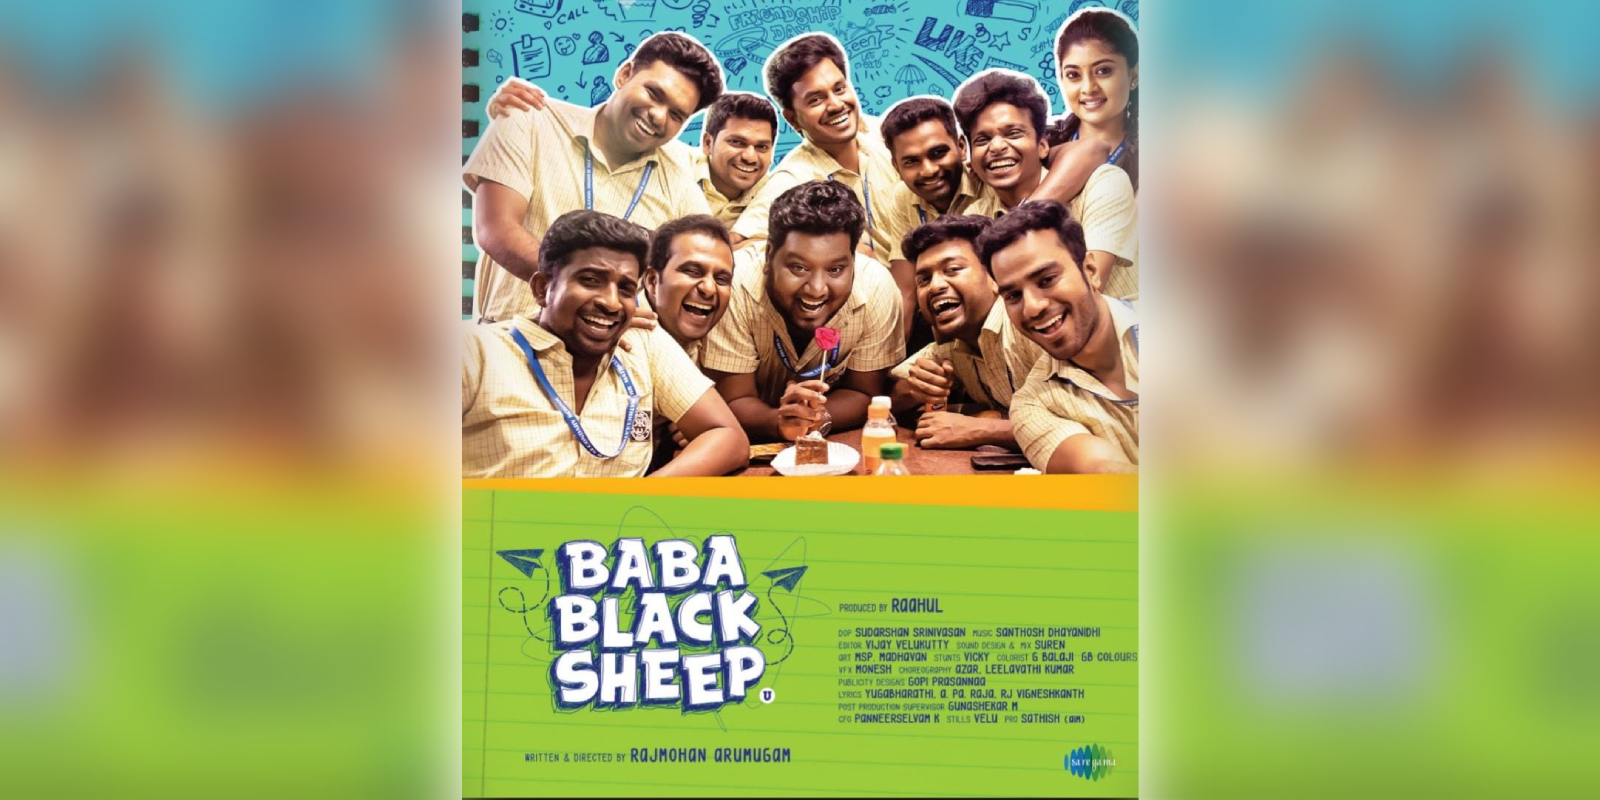 Baba Black Sheep review: A film with two different halves